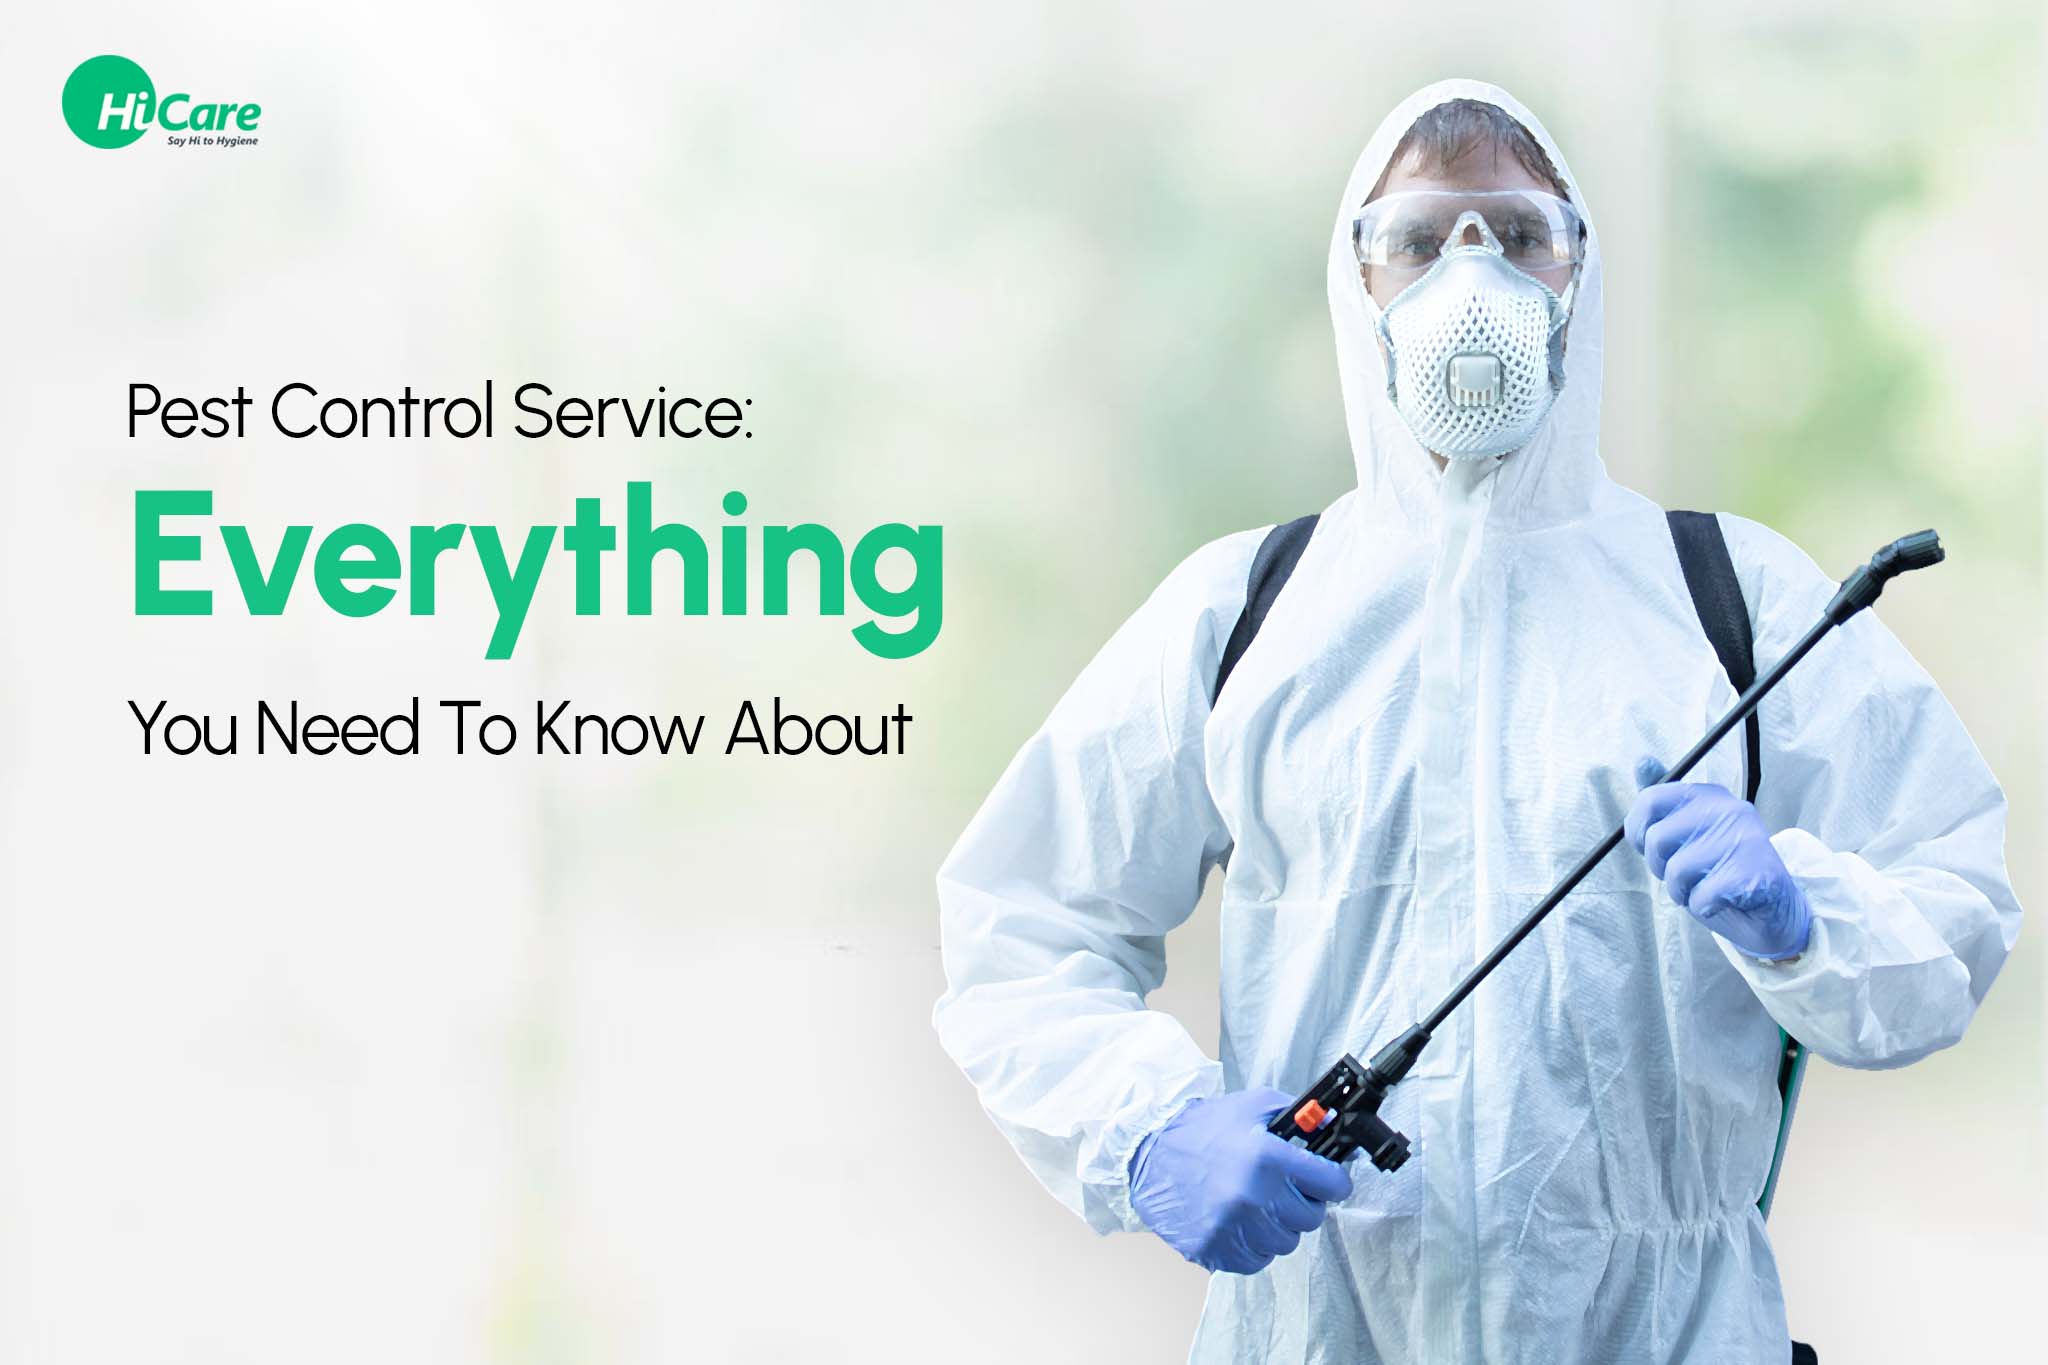 Pest Control Service: Everything You Need To Know About